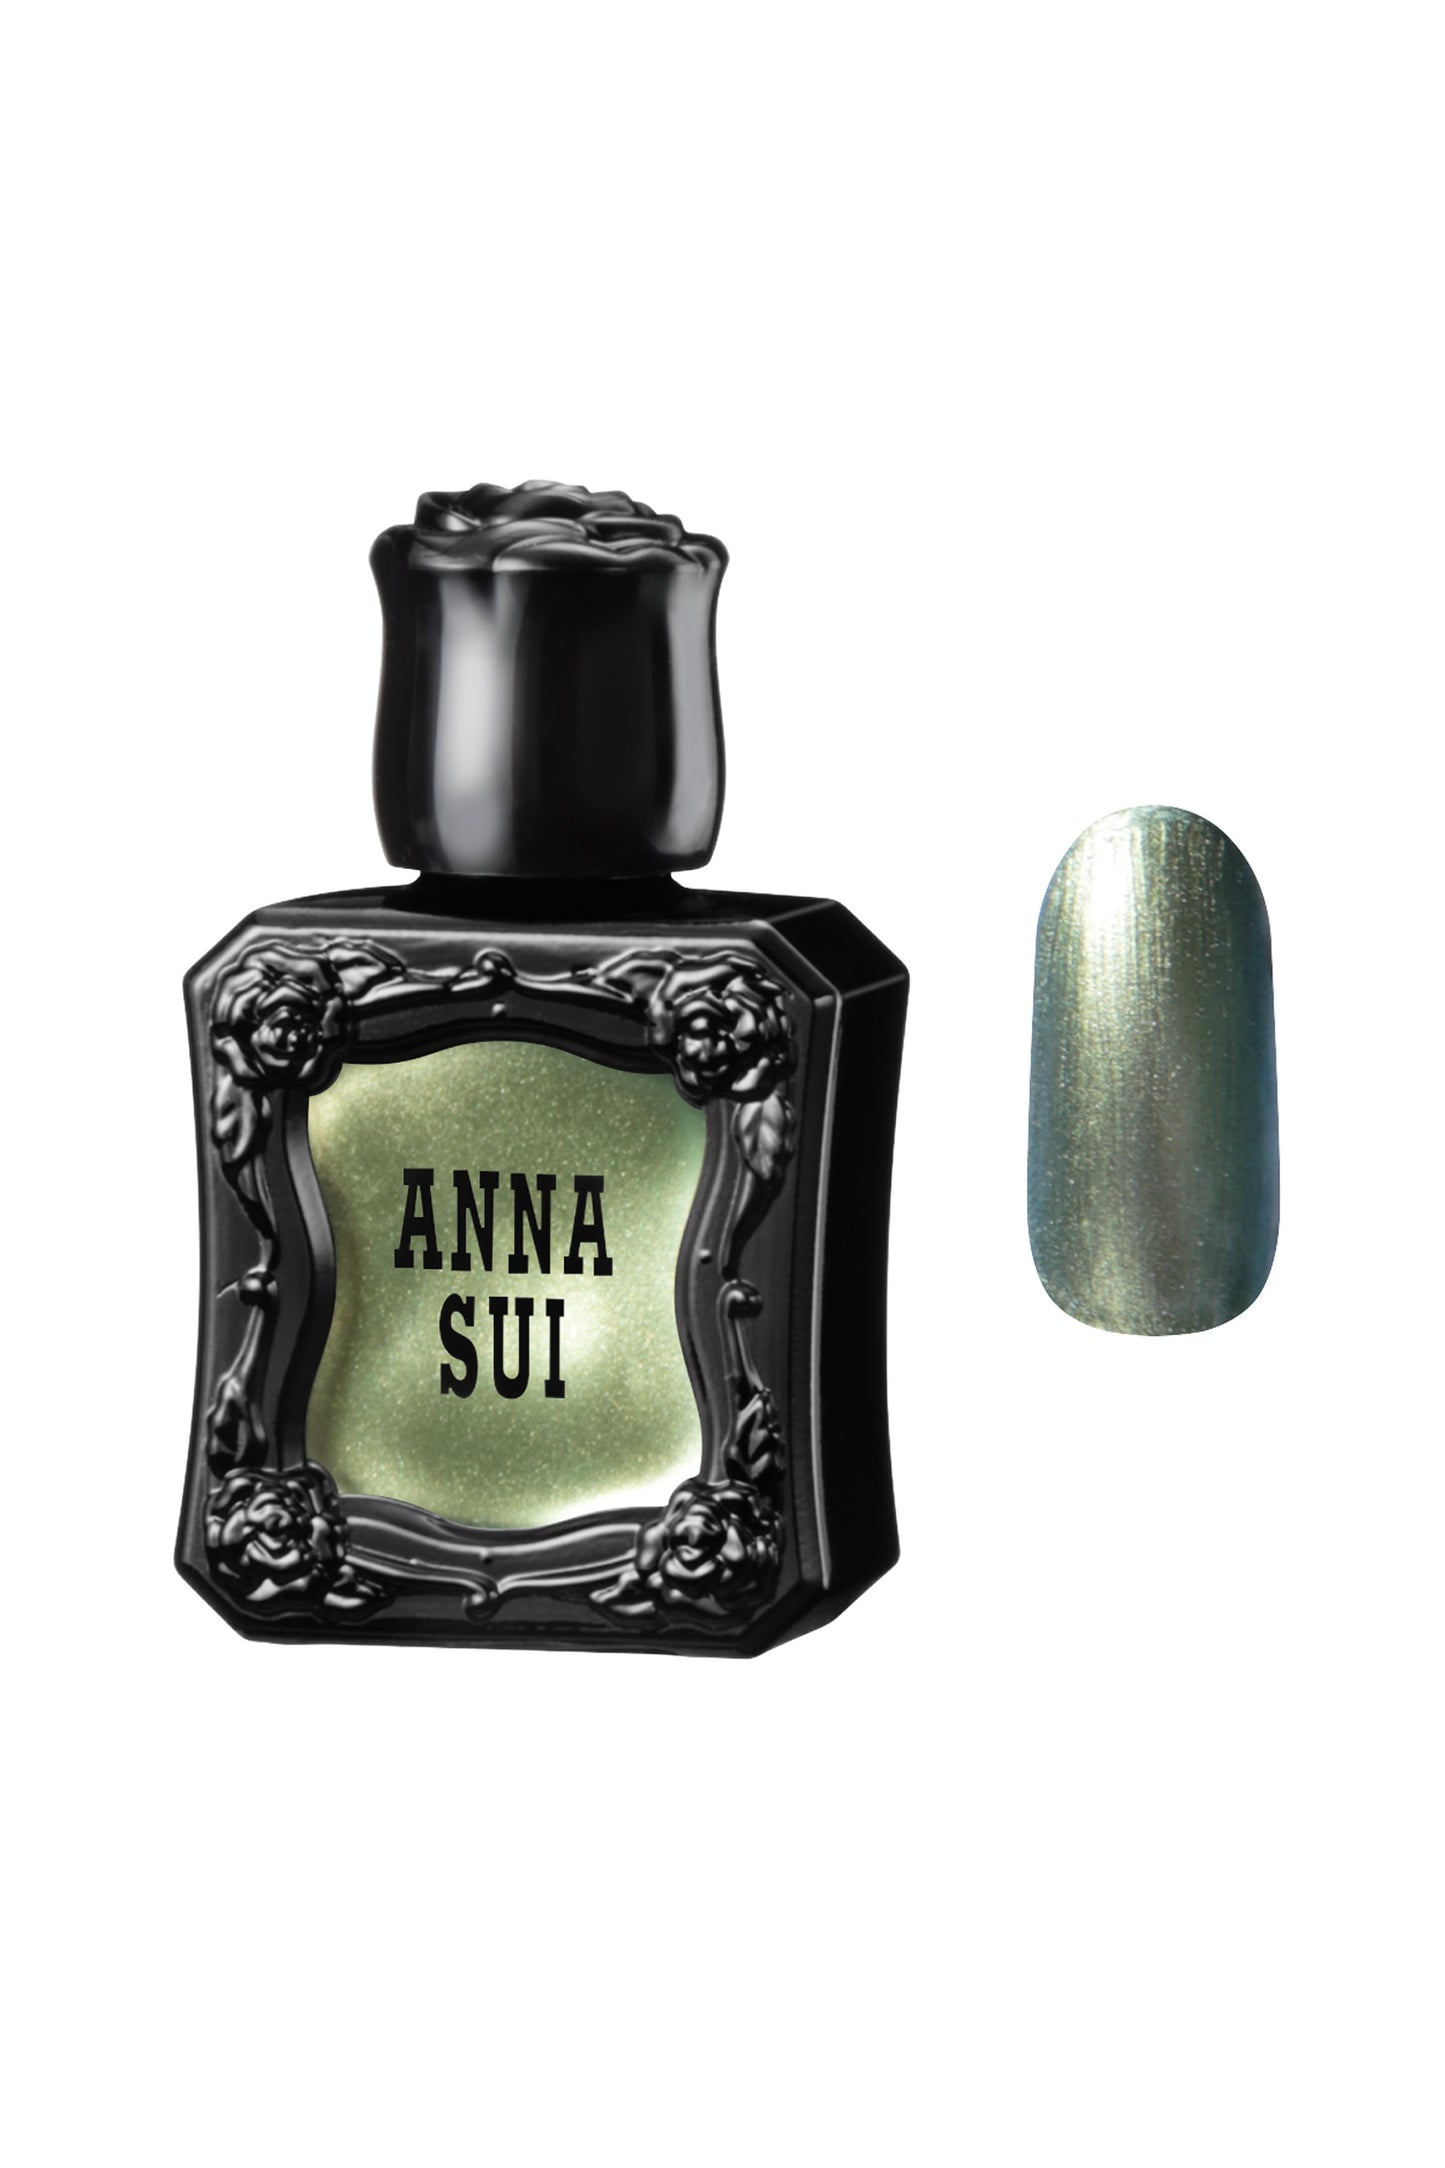 METALLIC PISTACHIO Polish bottle raised rose pattern, Anna Sui in black over nail colors in front